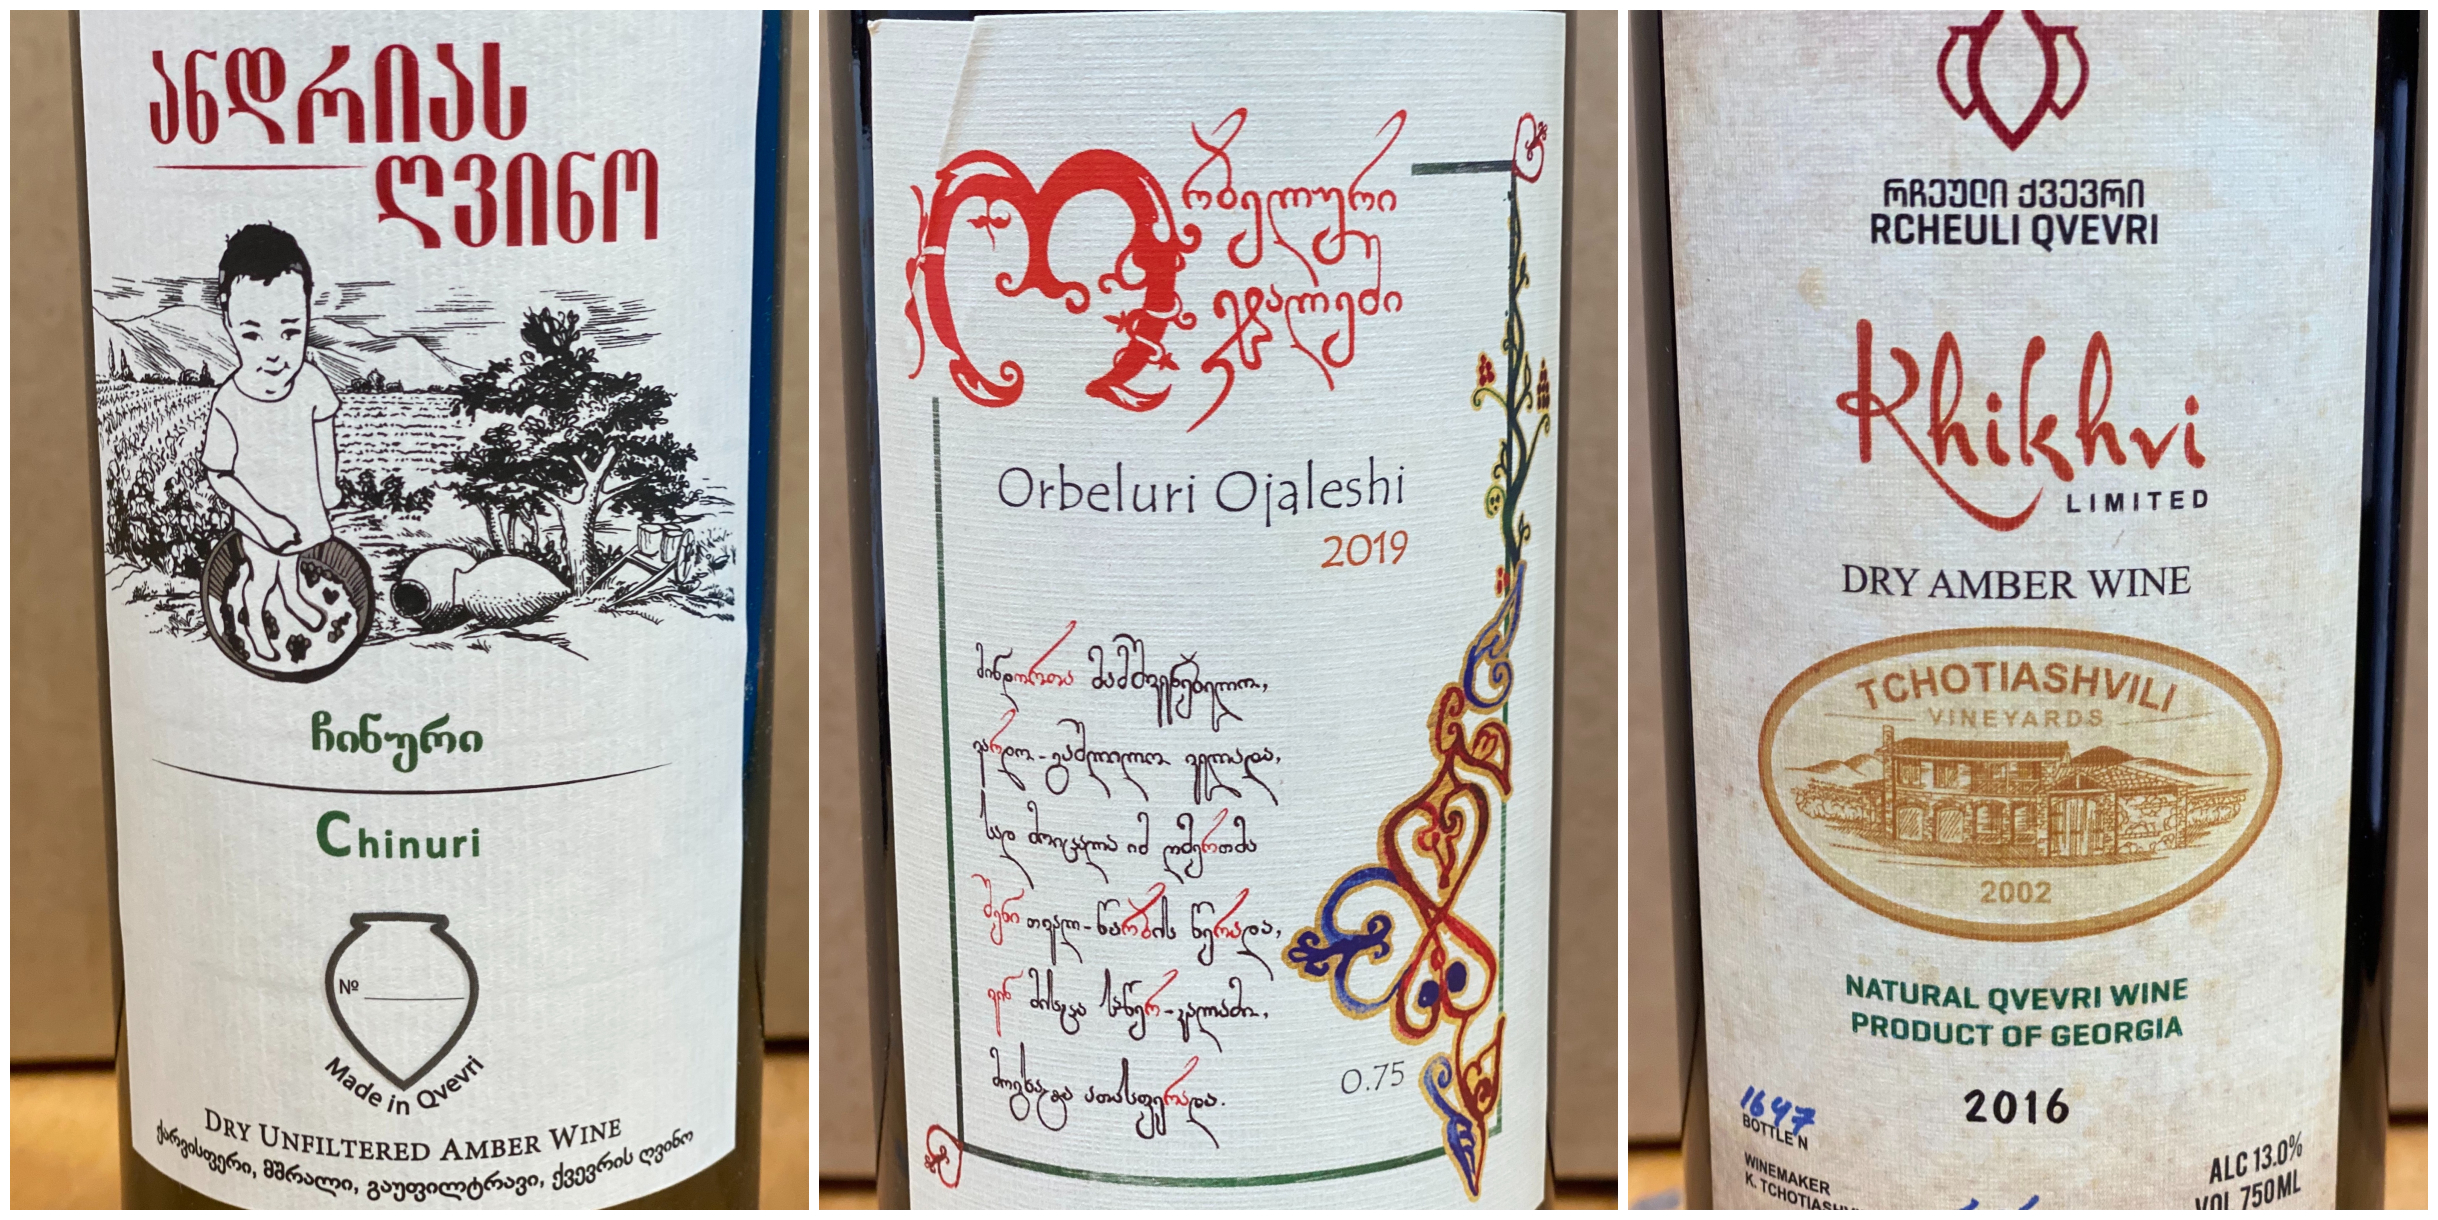 Georgian wines – don't be put off by the labels